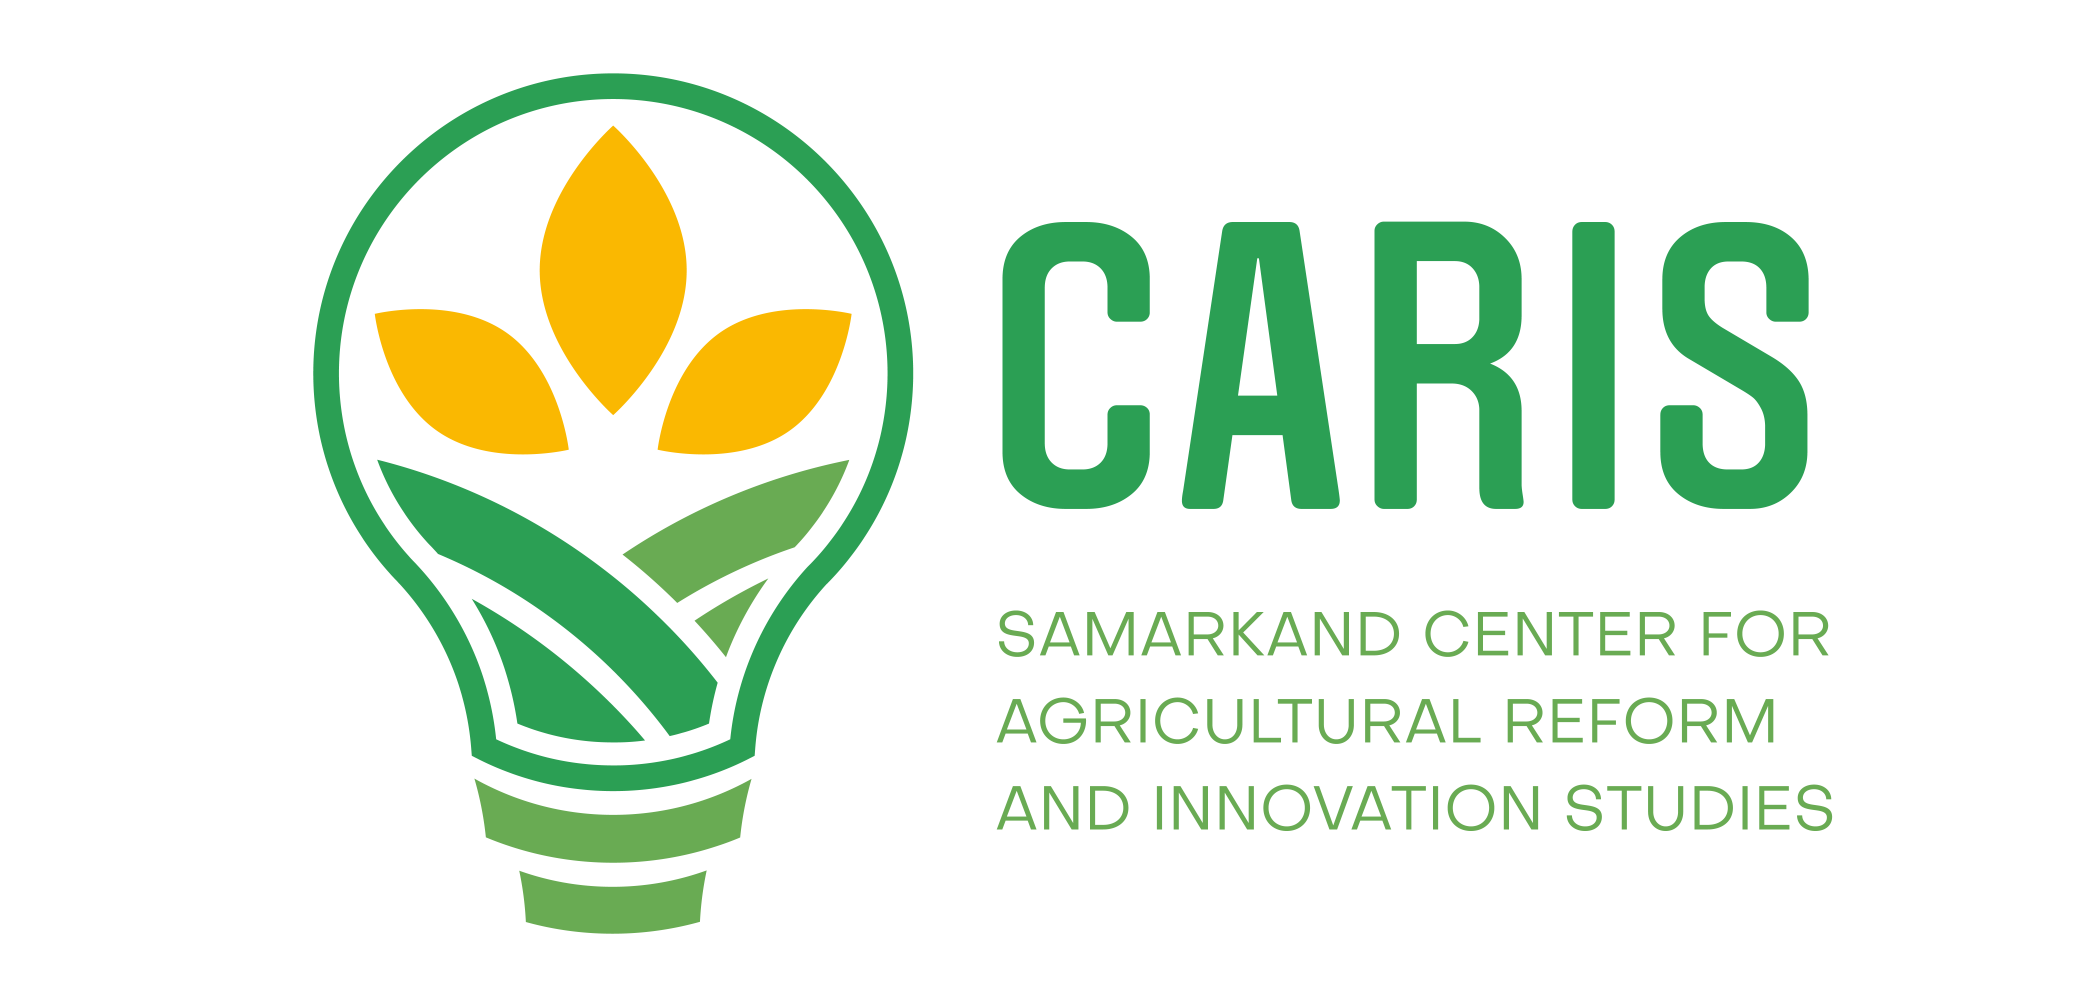 Logo of Samarkand Center for Agricultural Reform and Innovation Studied (CARIS)